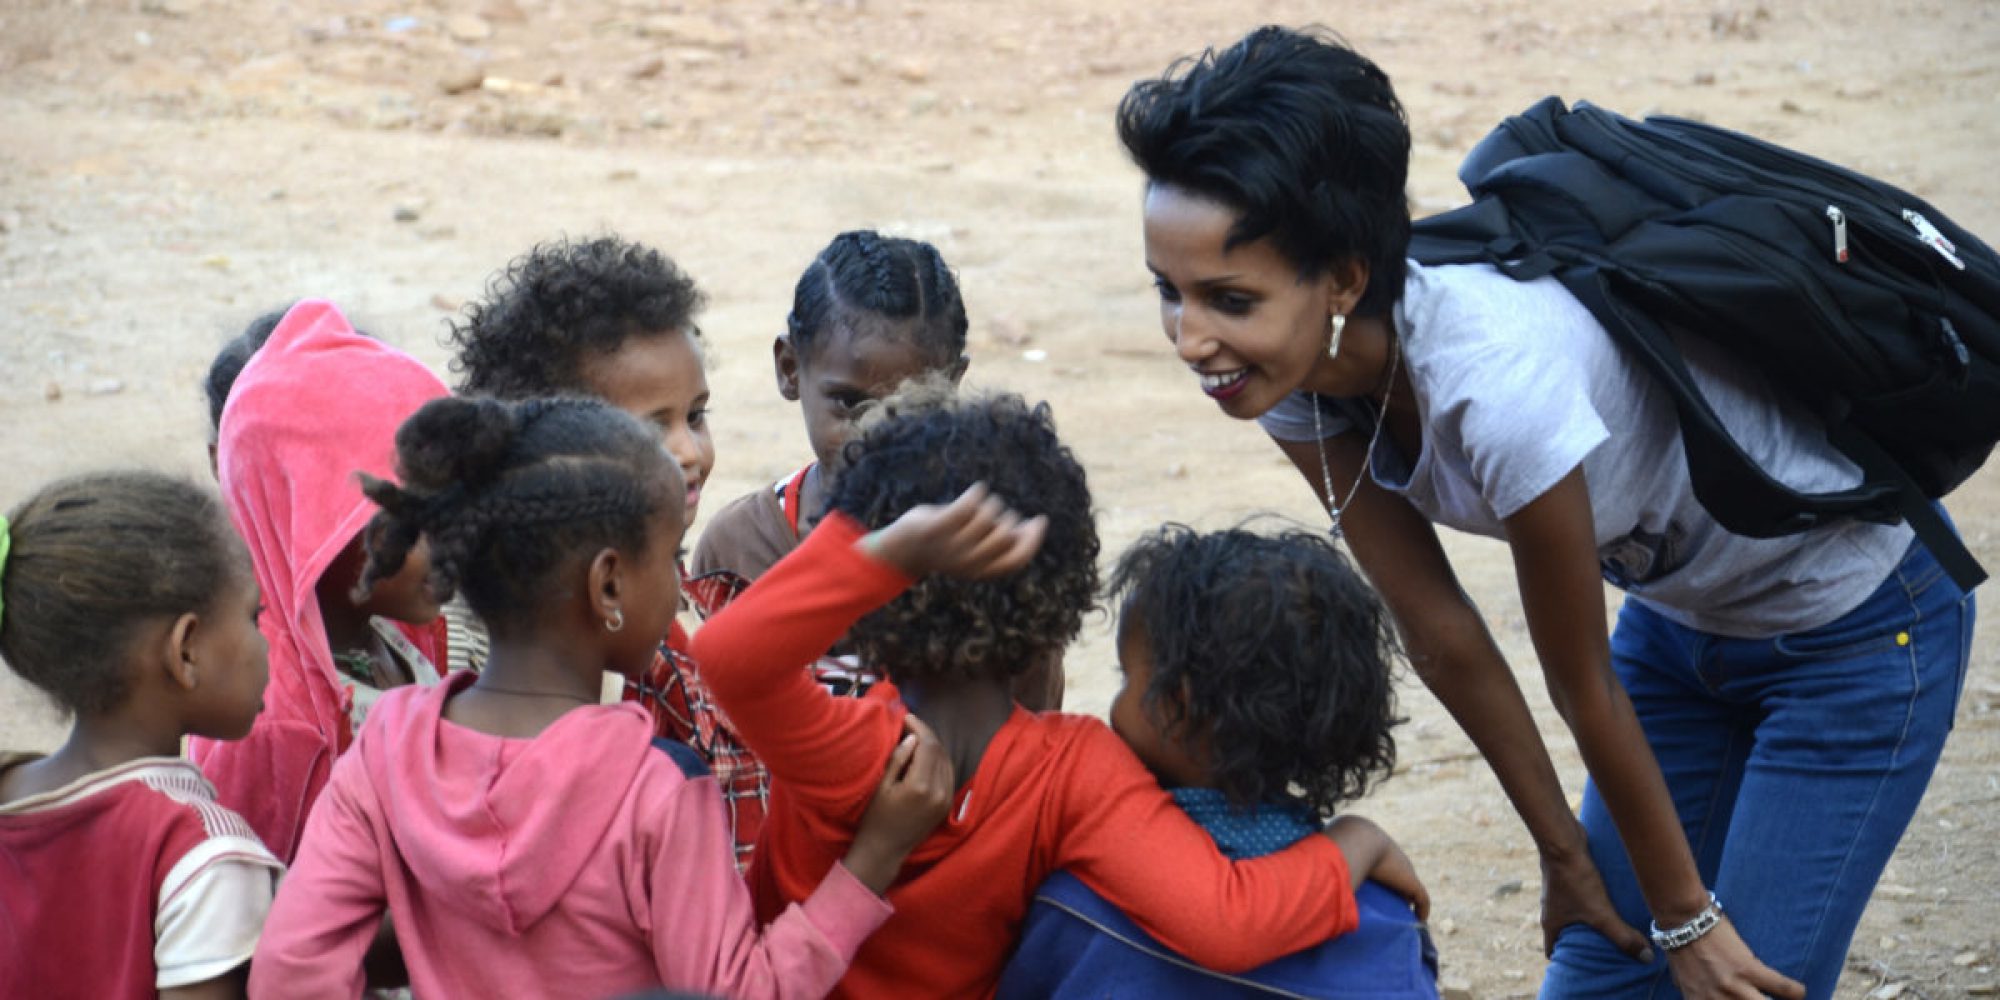 Hiwot Ali coordinates the JRS counselling department and community outreach in Mai Aini refugee camp, northern Ethiopia.